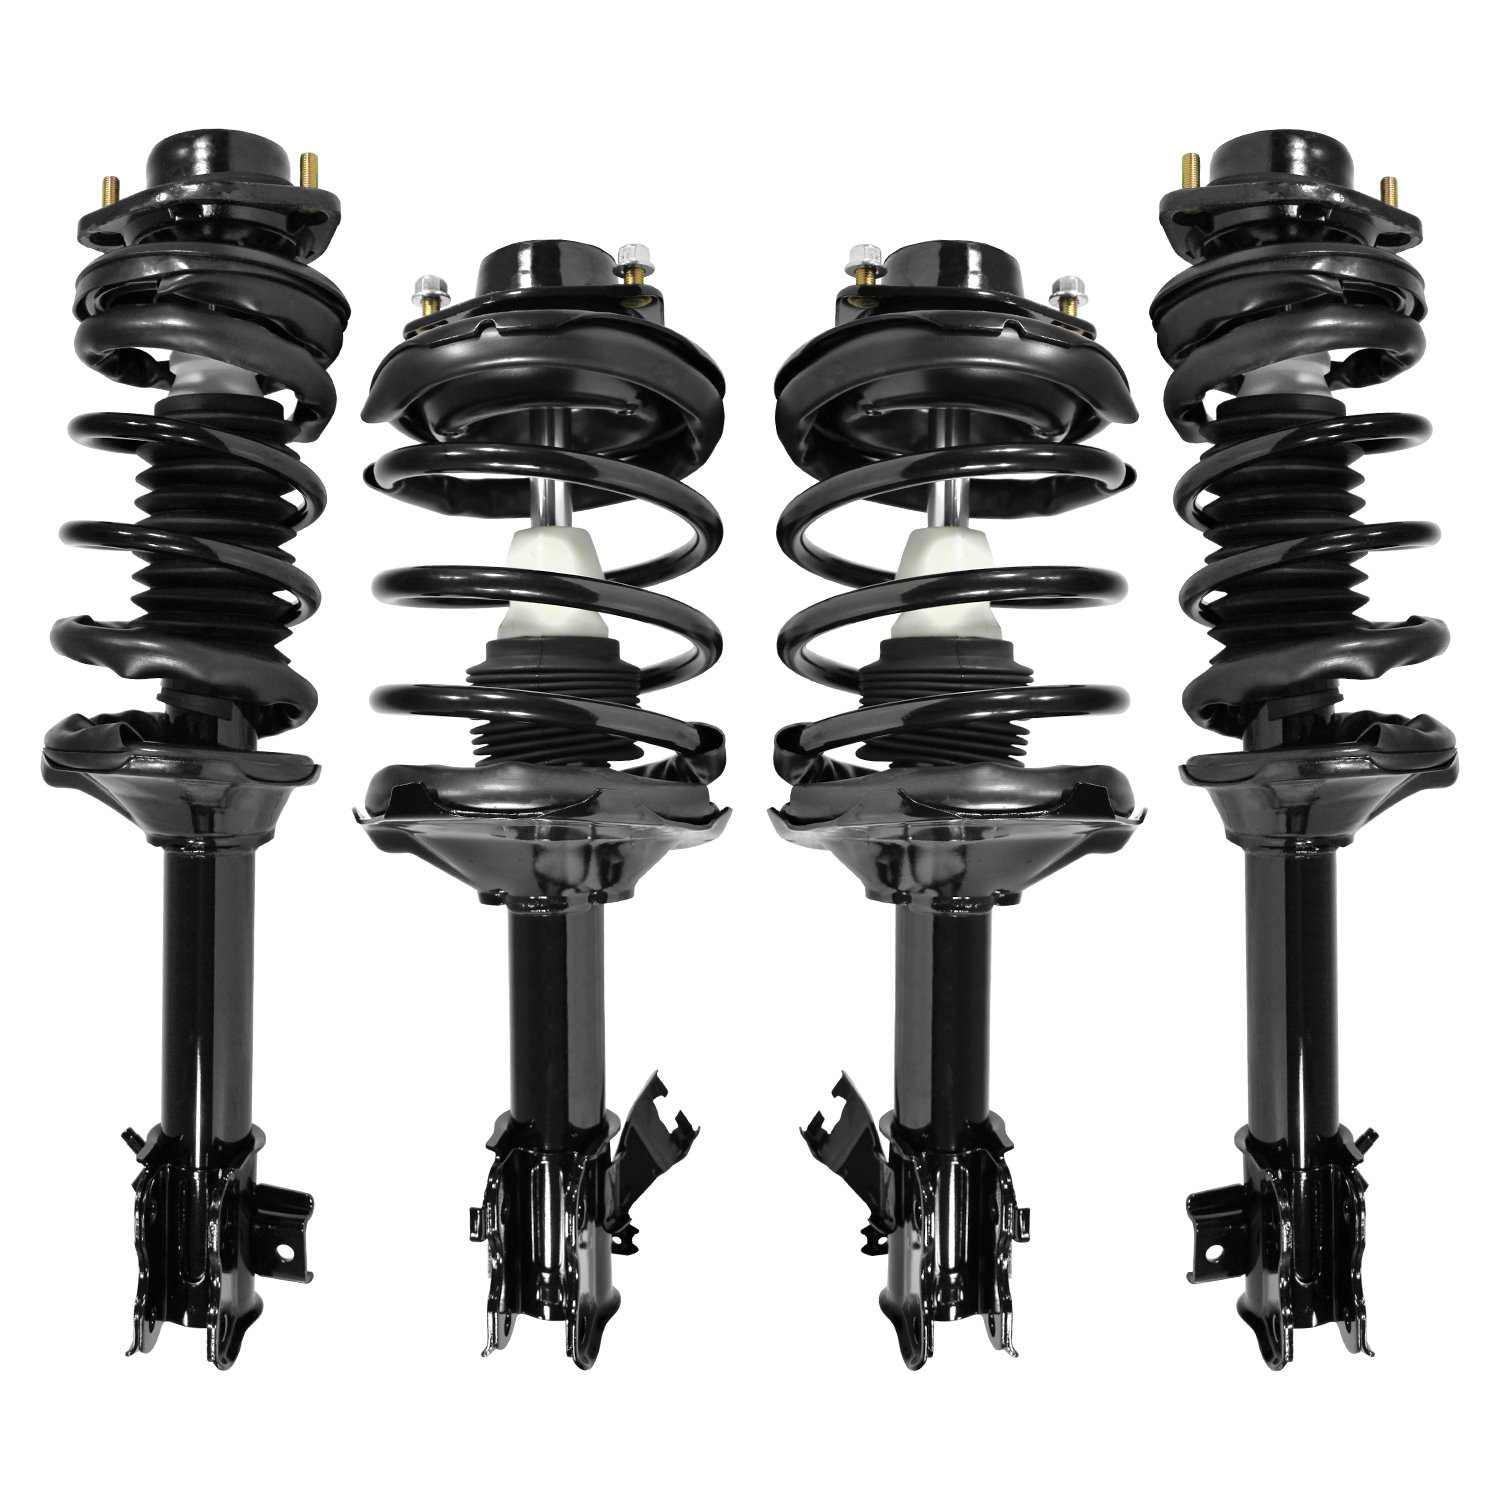 4-11391-15241-001 Front & Rear Suspension Strut & Coil Spring Assembly Kit Fits Select Nissan Altima